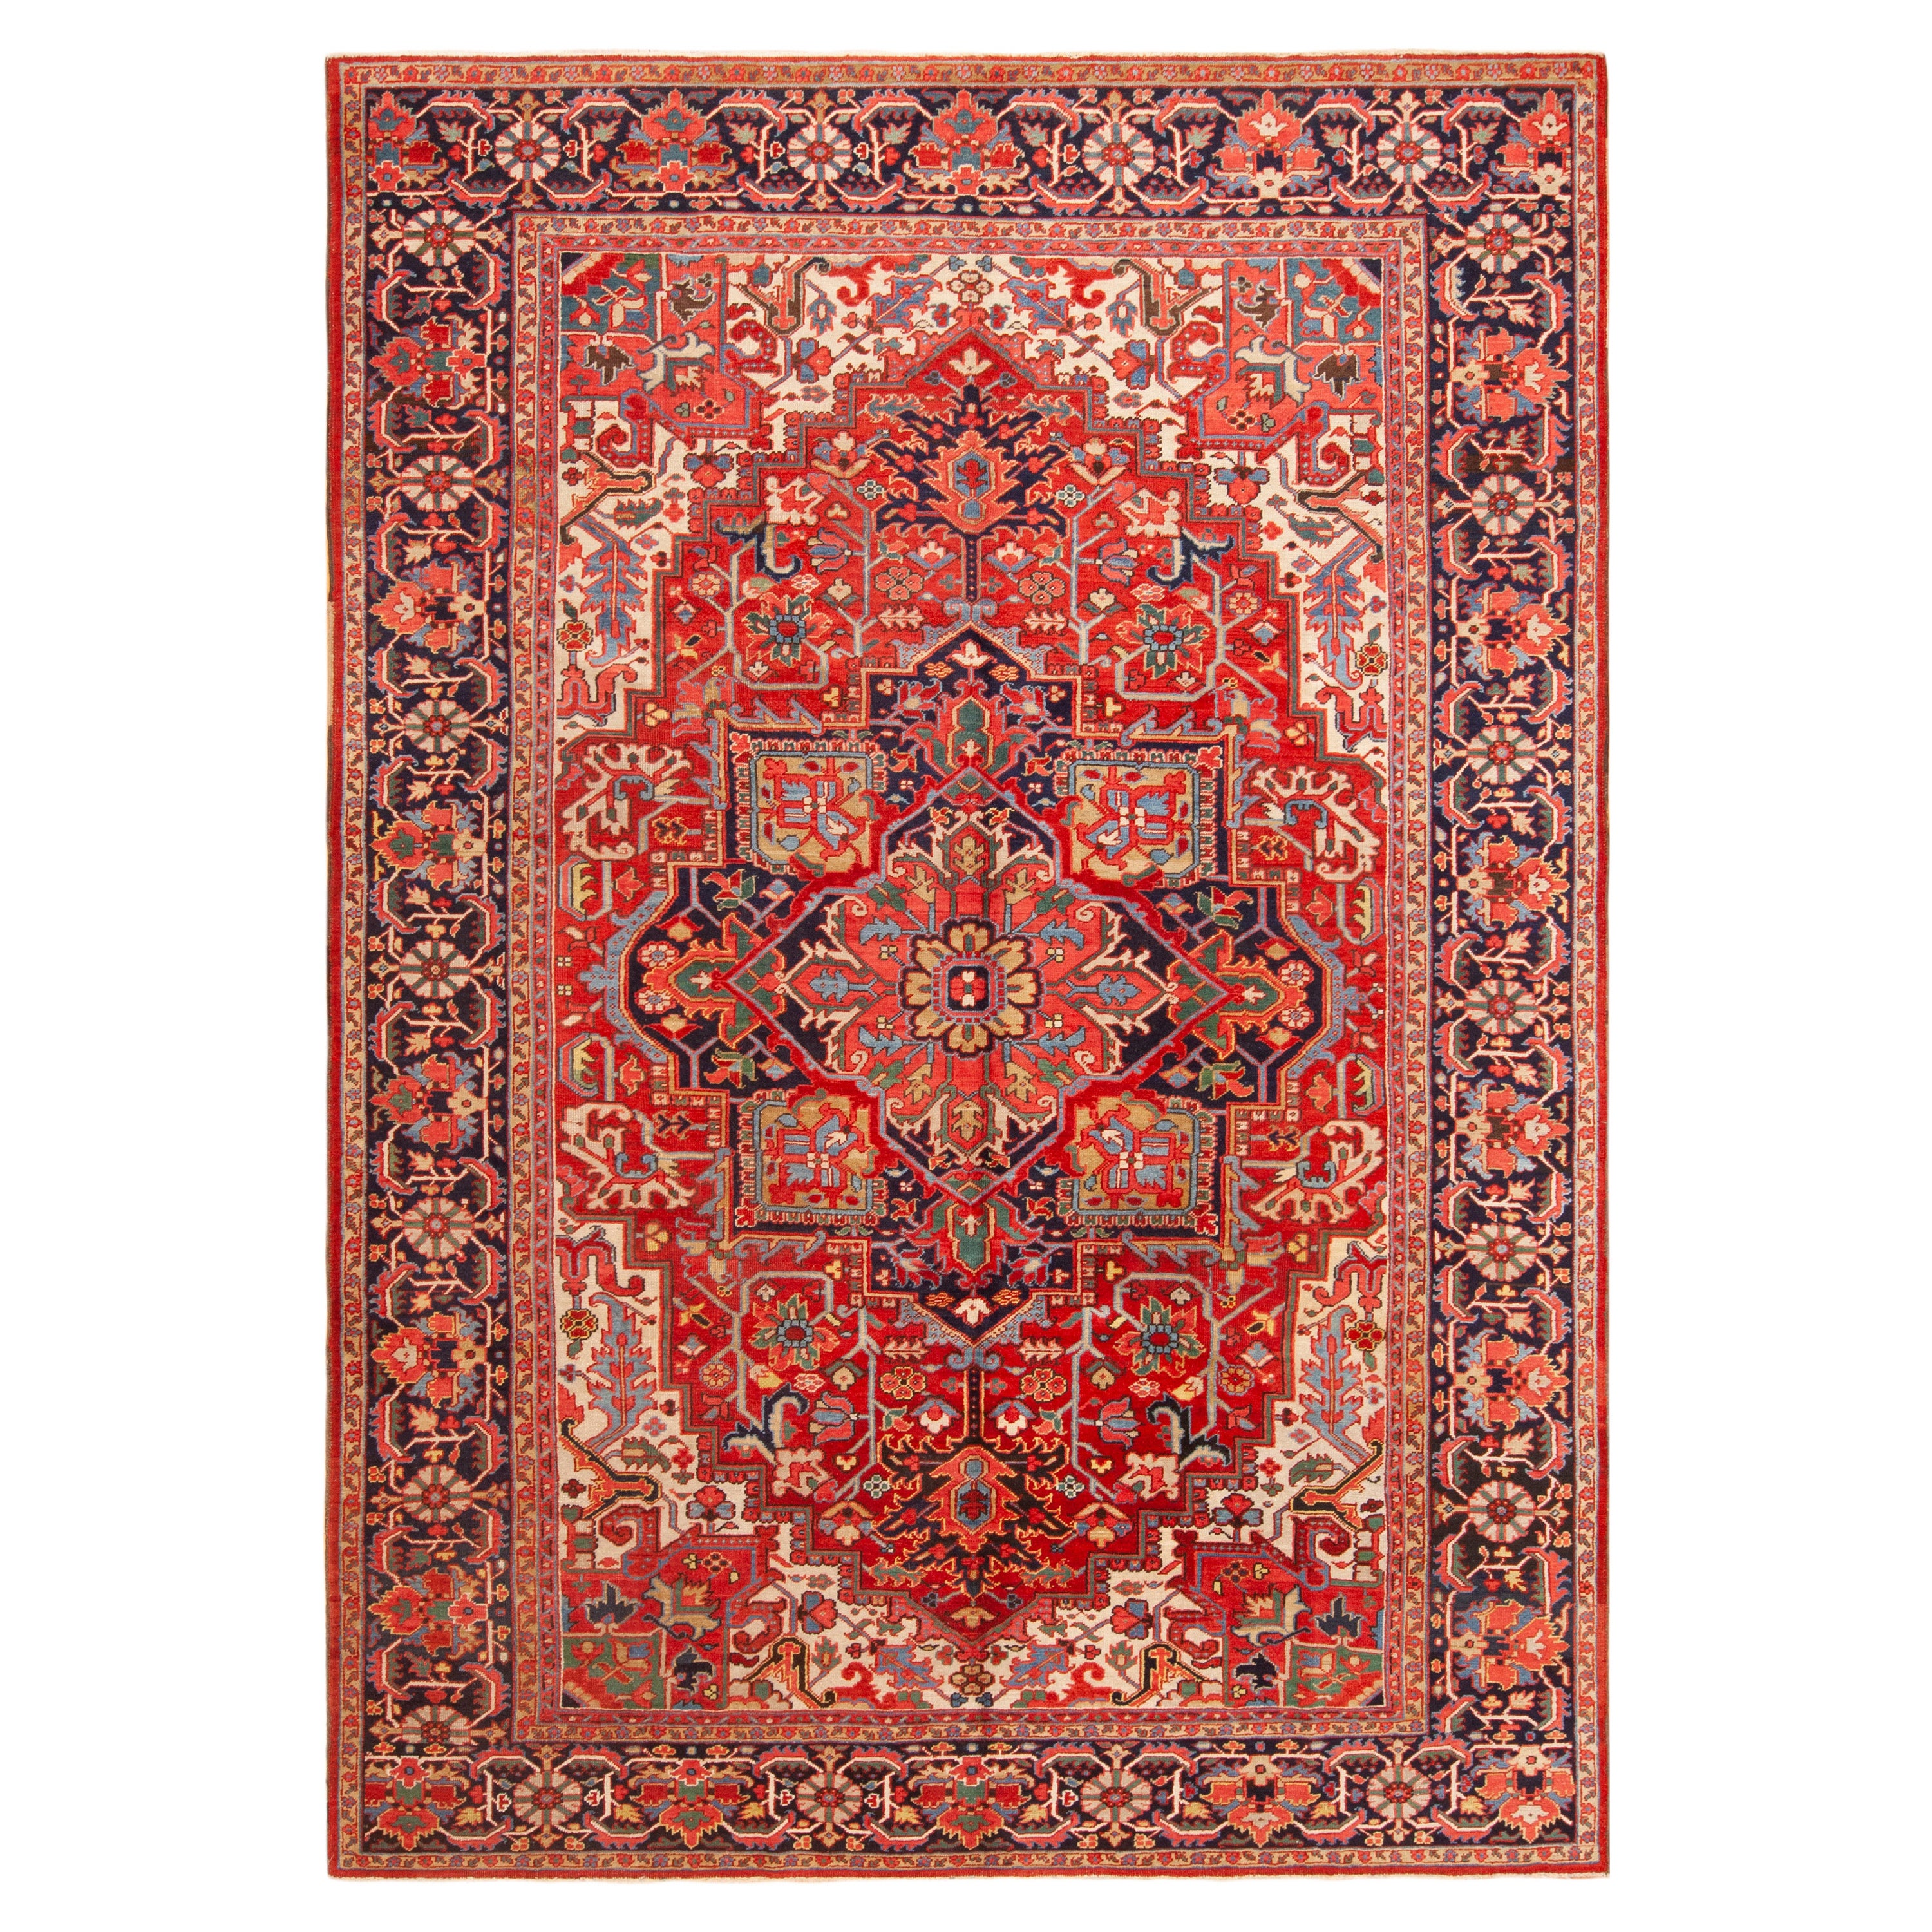 Extremely Impressive Antique Red Medallion Persian Heriz Rug 8'9" x 12'1" For Sale